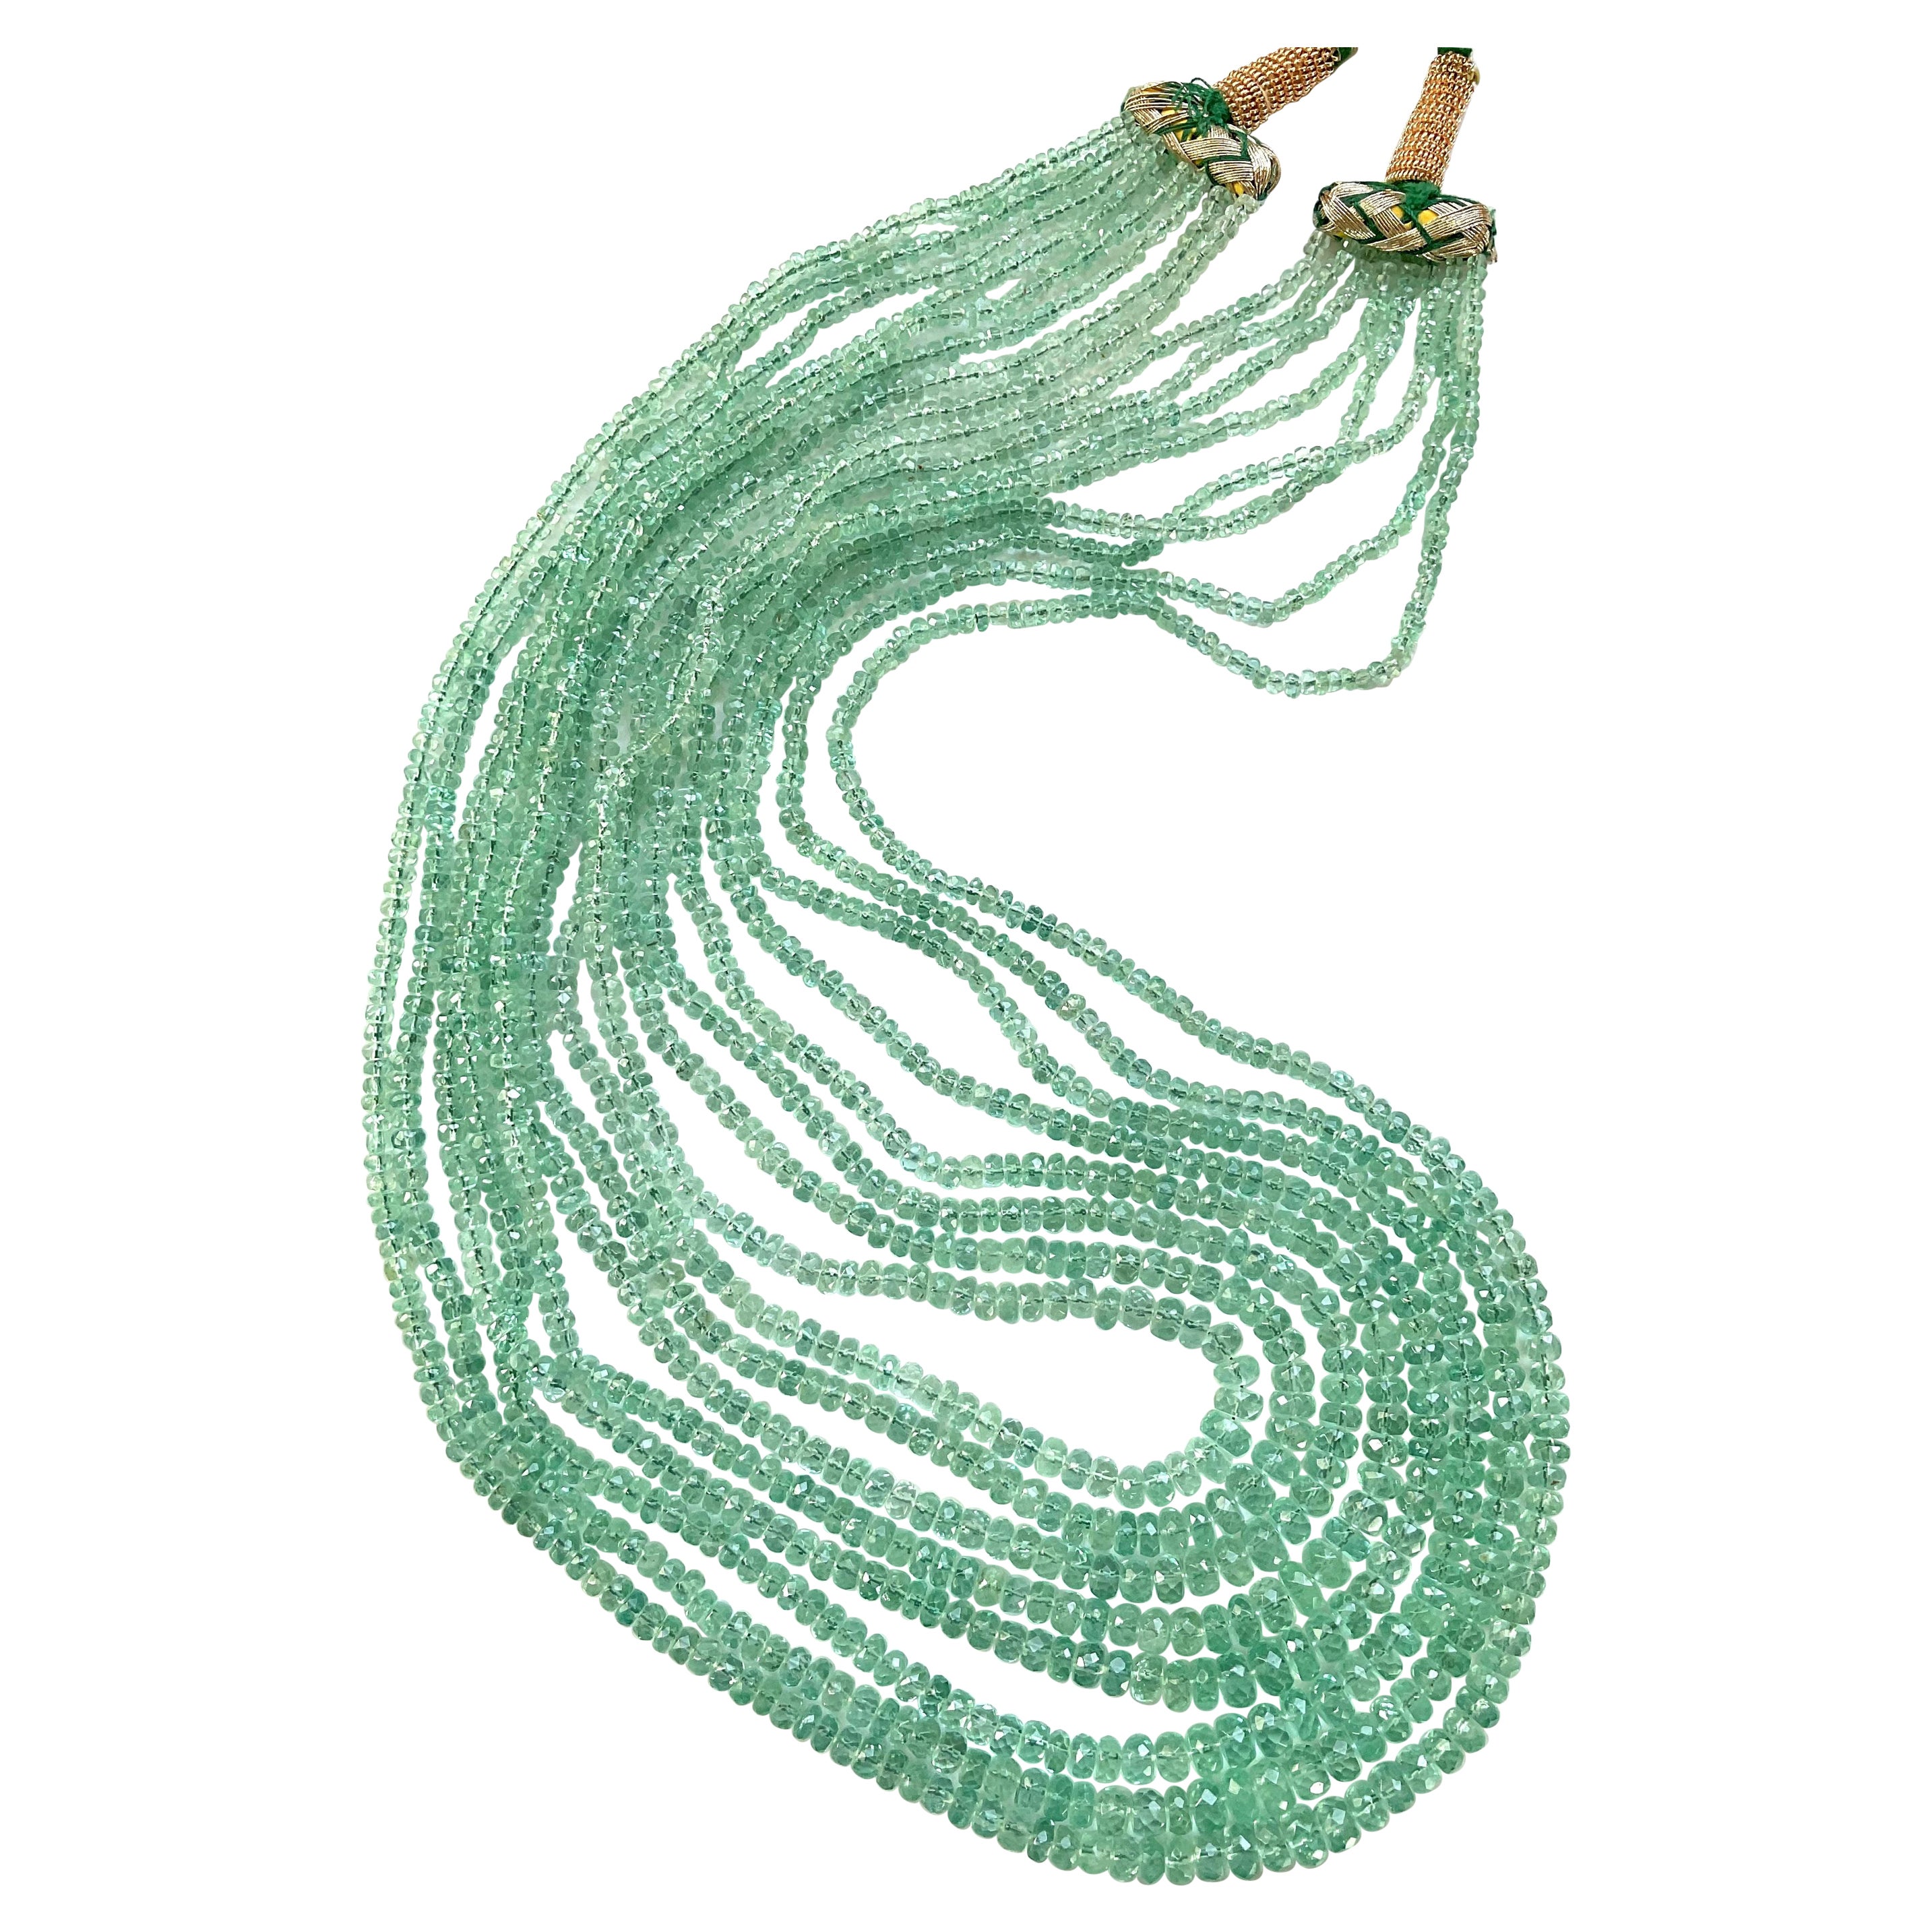 342.09 Carats Panjshir Emerald Faceted Beads For Fine Jewelry Natural Gemstone For Sale